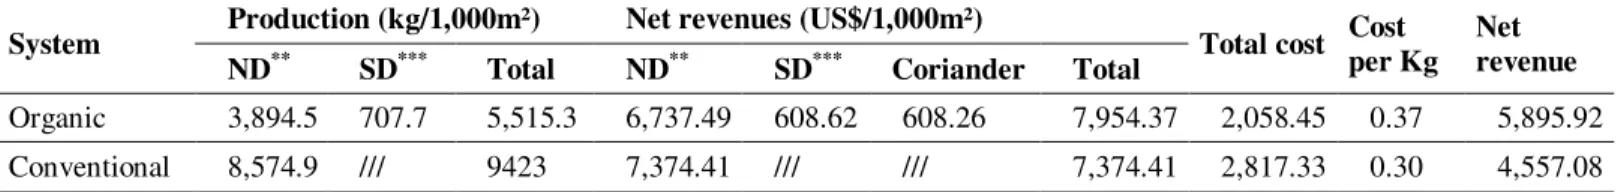 Table 4.  Net revenues  obtained  from  the  tomato  plant  crop  in an  organic  farming  system  and in a  conventional  system  (in  US  dollars - US$) * 